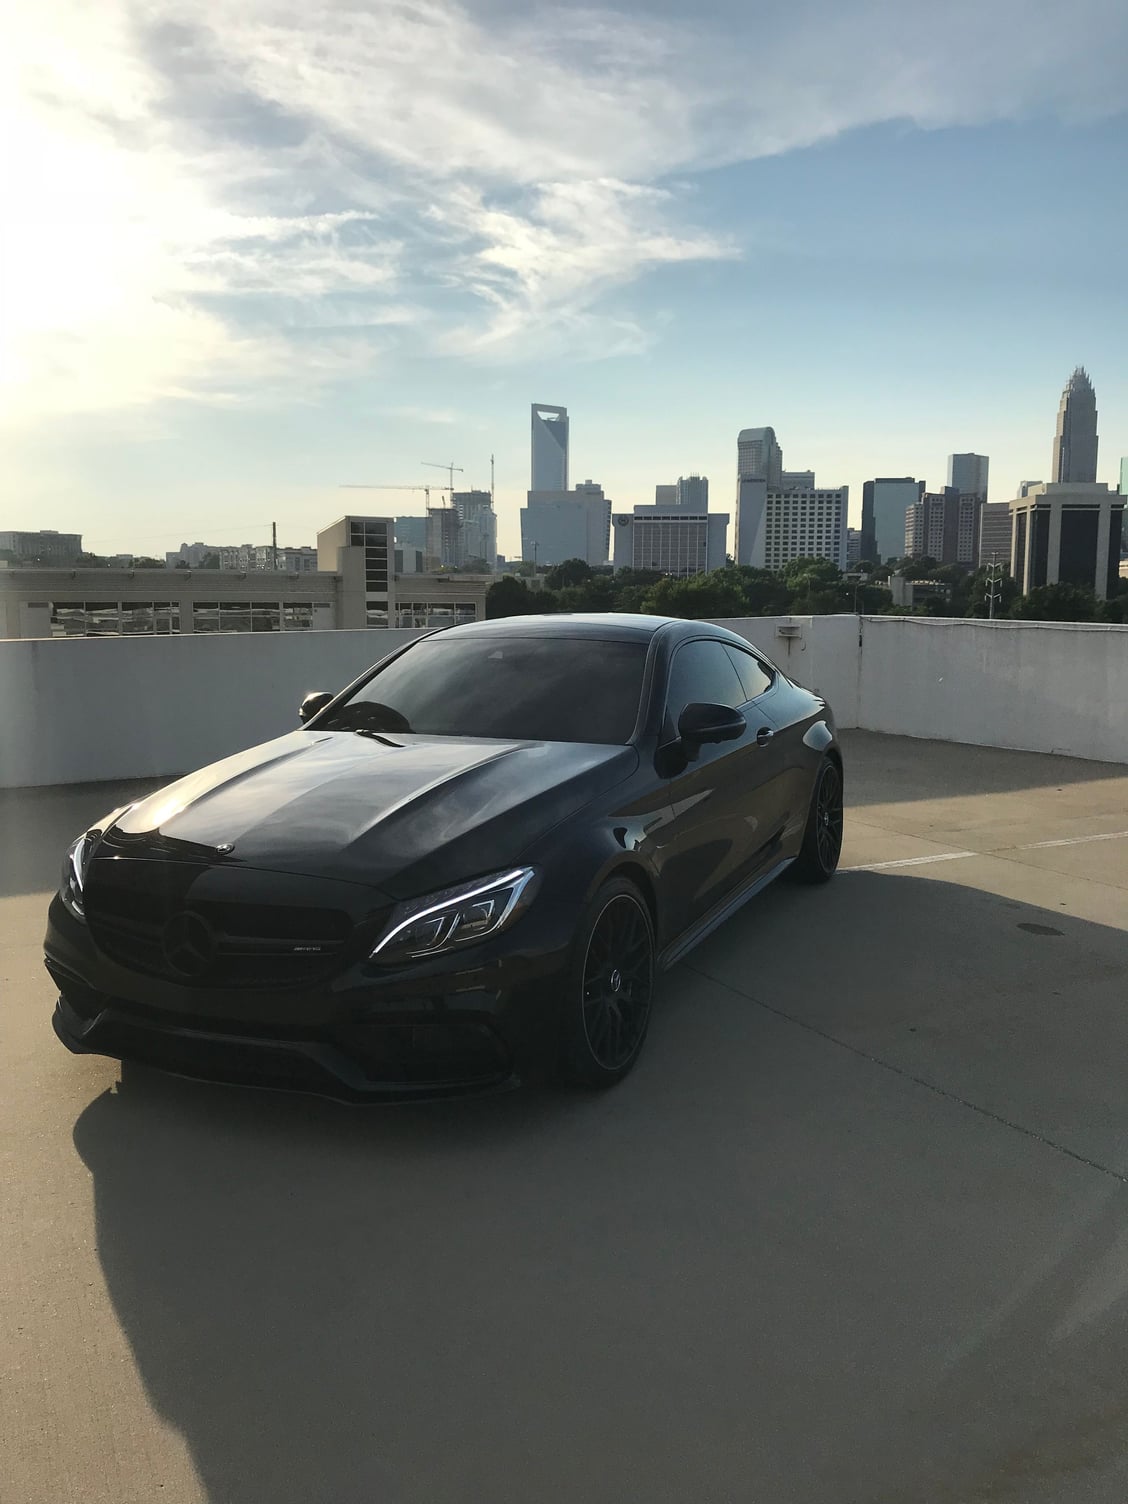 2018 Mercedes-Benz C63 AMG S - 2018 Mercedes-Benz C-Class C 63 S AMG Coupe Black on Black - Used - VIN WDDWJ8HB1JF642467 - 2,500 Miles - 2WD - Automatic - Coupe - Black - Charlotte, NC 28202, United States